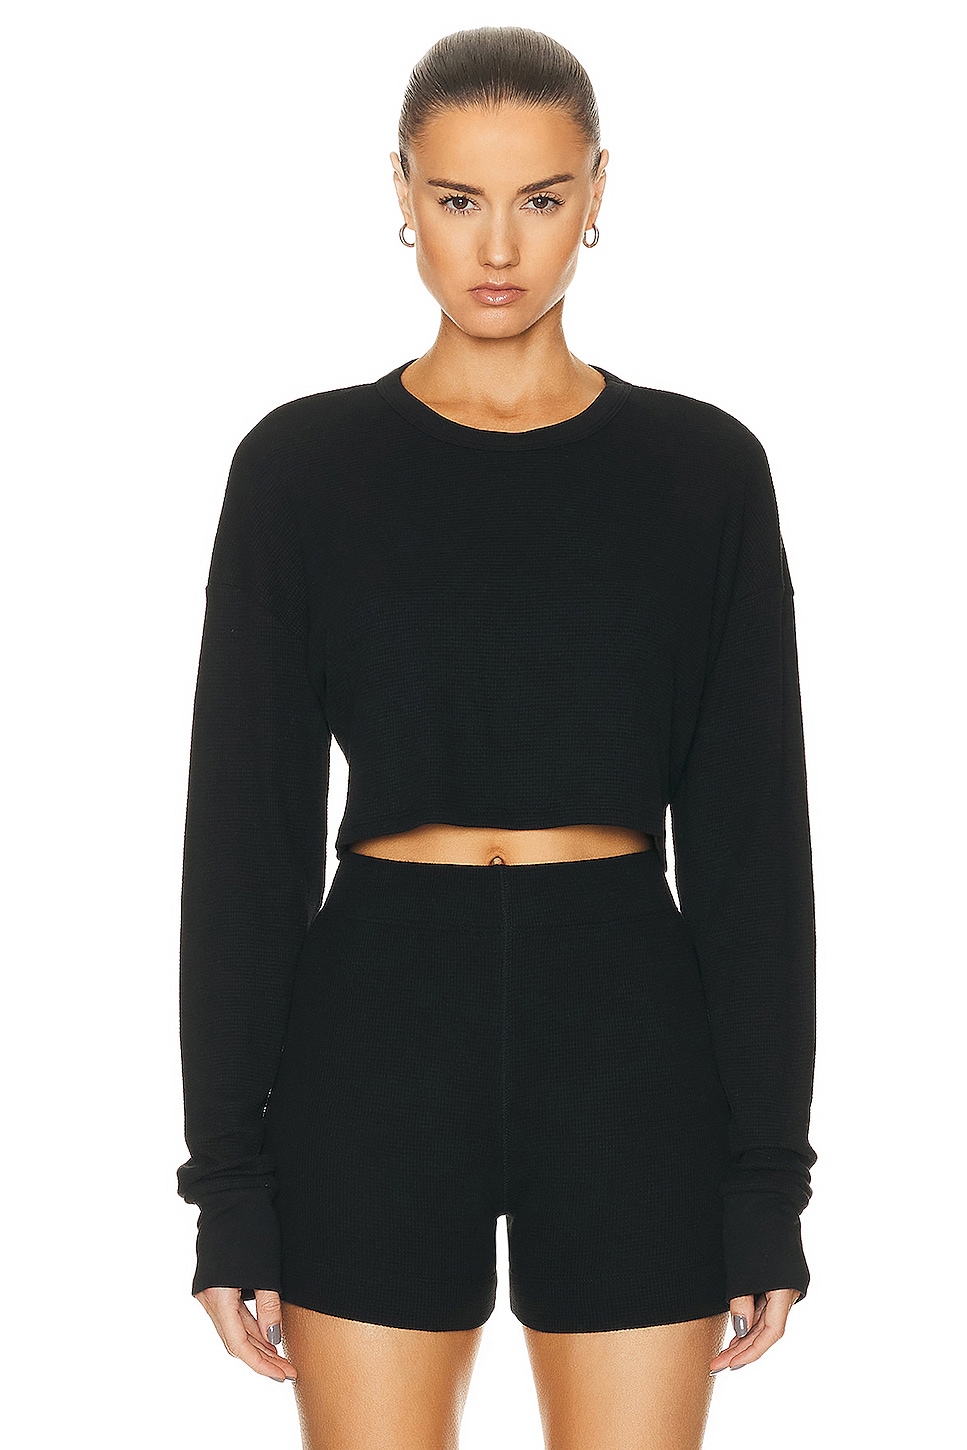 Image 1 of Eterne Cropped Oversized Thermal Top in Black